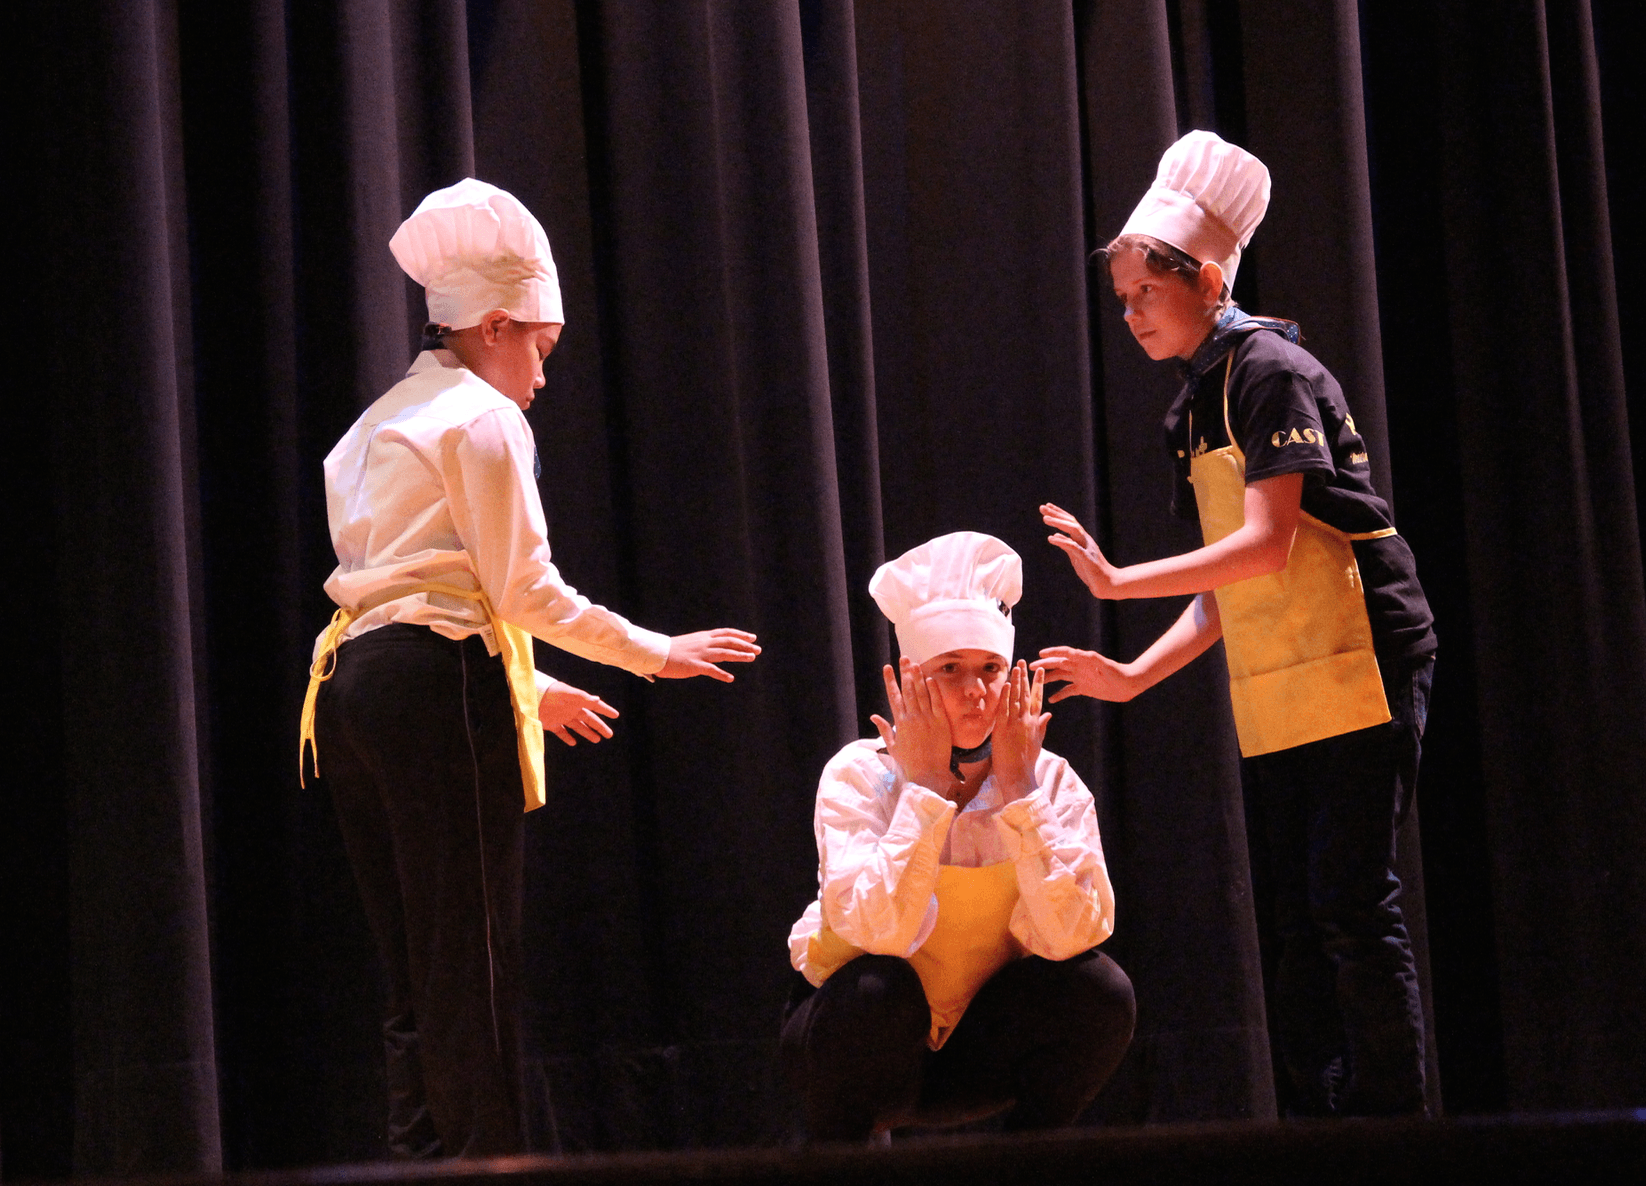 The Western Middle School Theater Club will perform The Little Mermaid Jr. on Friday March 23 and Saturday March 24, 2018. Photo: Leslie Yager